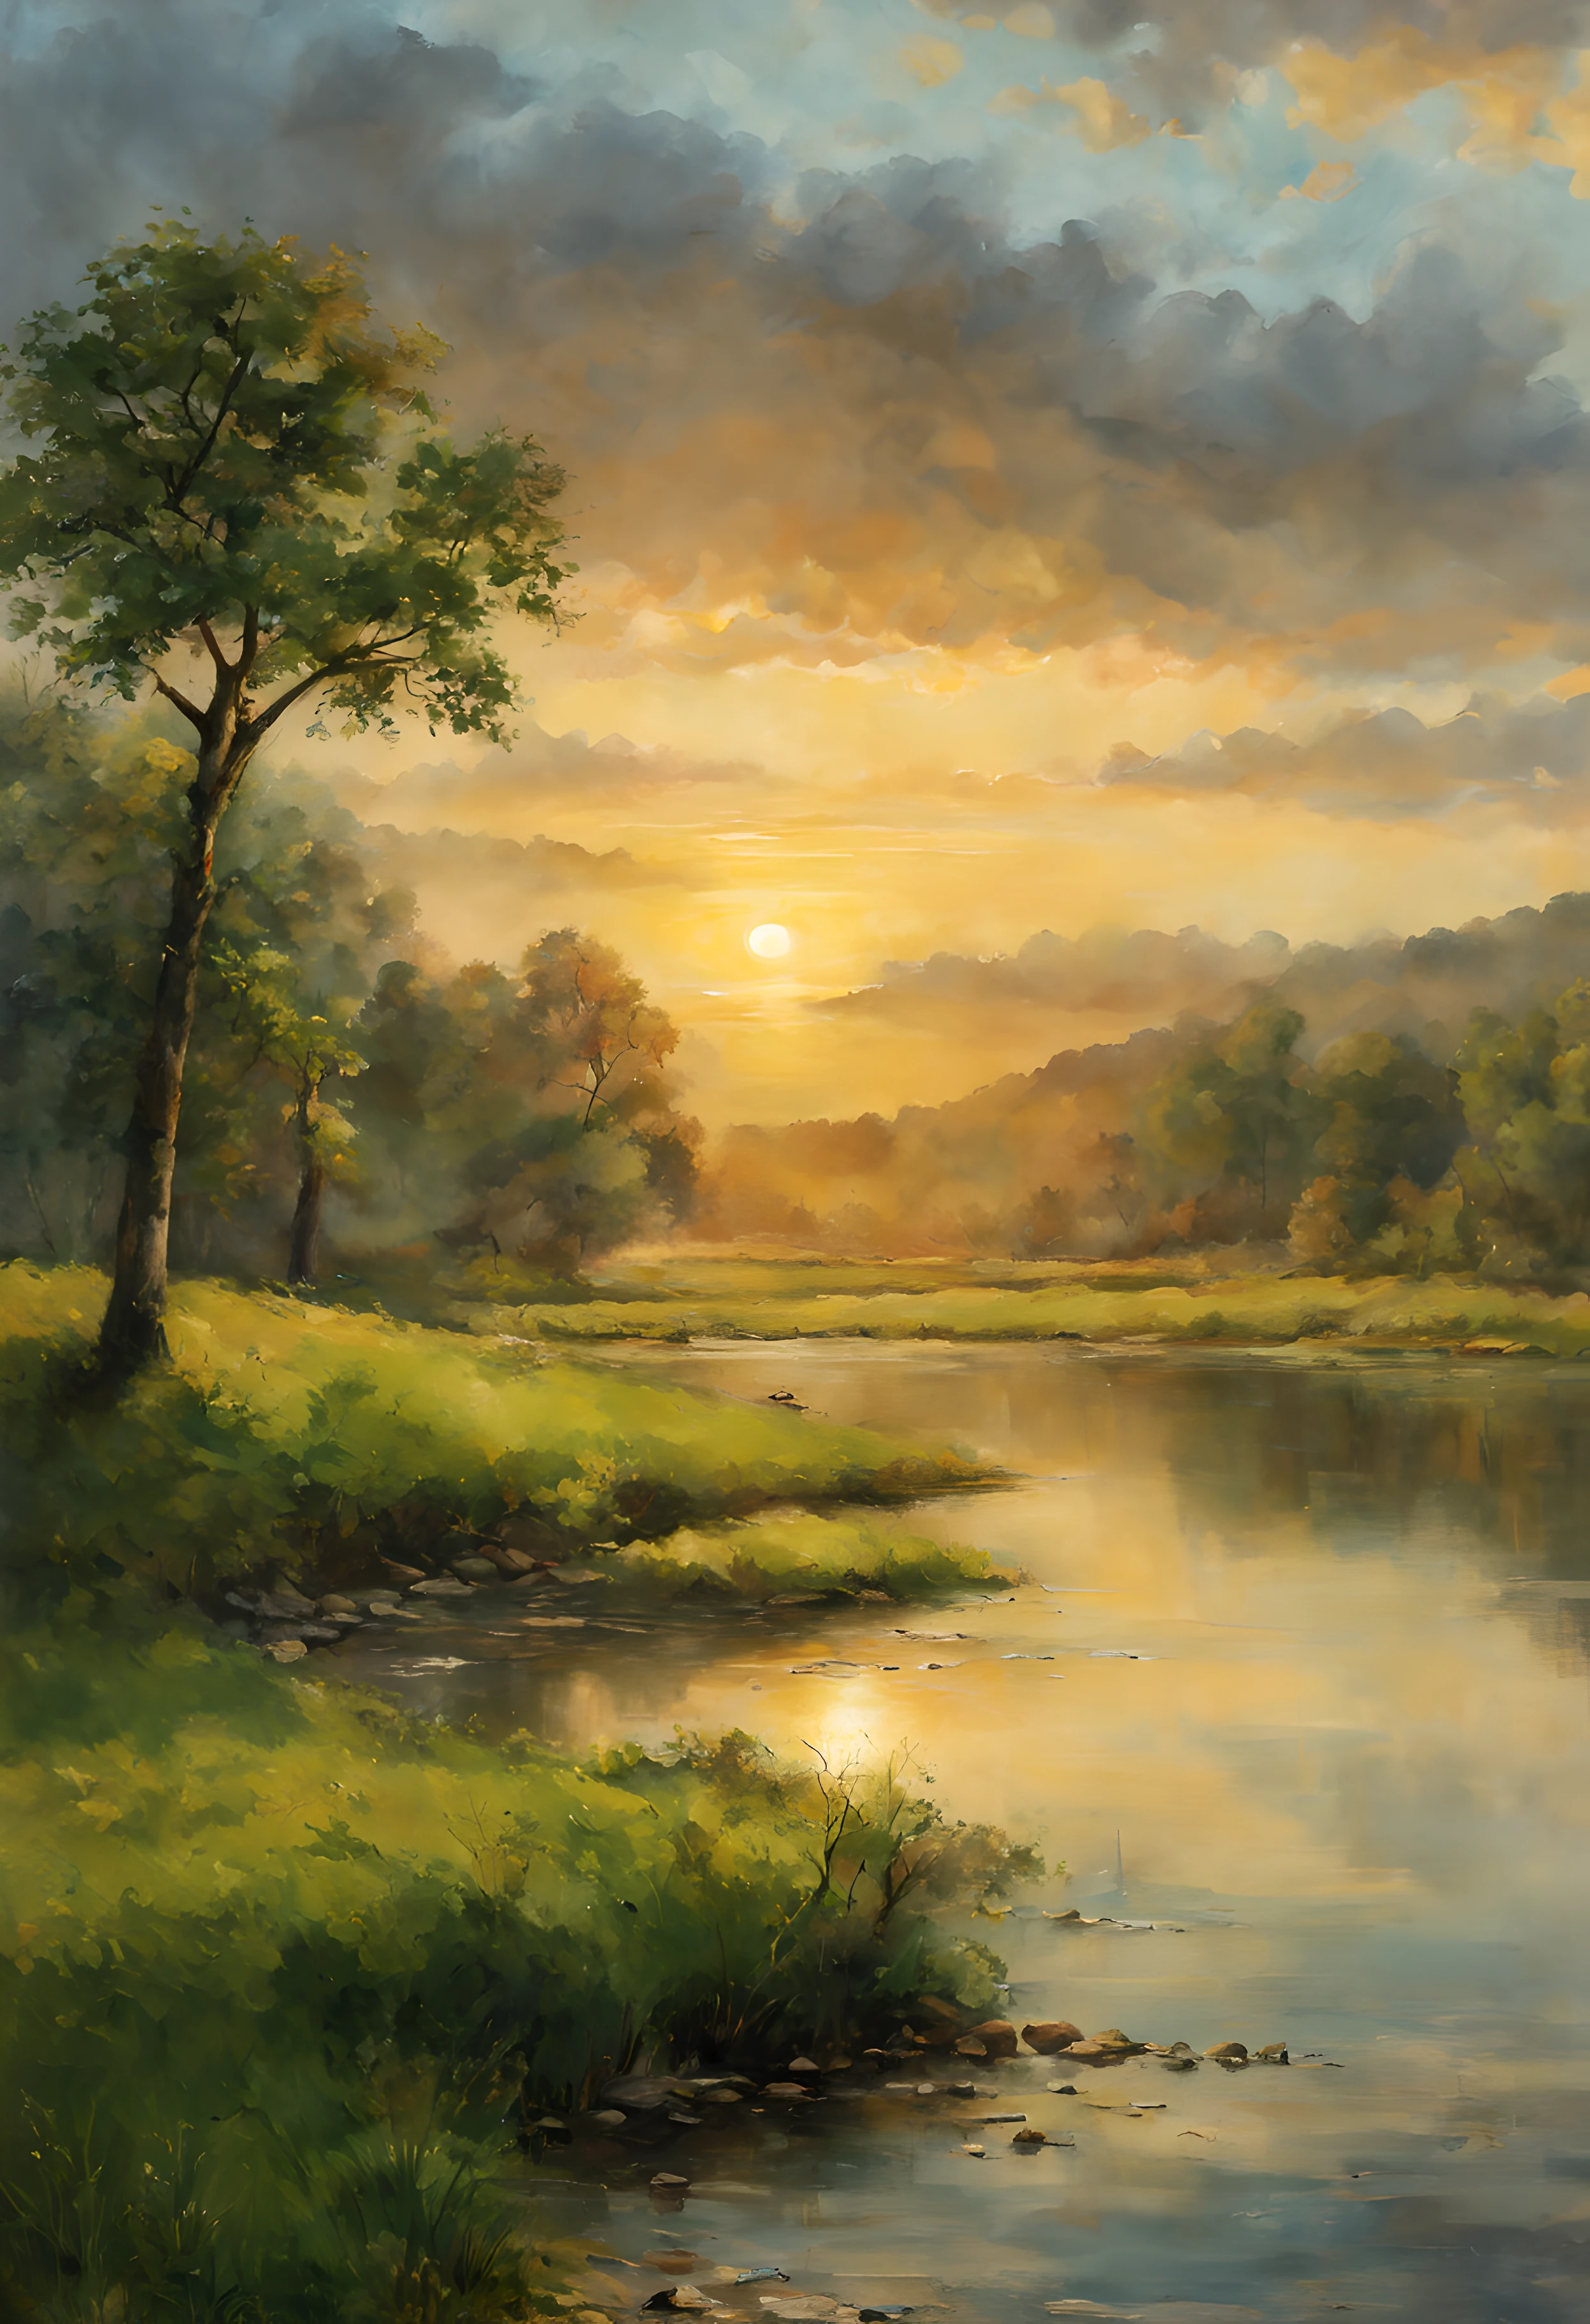 (Best Quality,4k,8K,High resolution,Masterpiece:1.2),Over-Detailed,Realistic:1.37,landscape,colorful,HDR, clear focus, physical rendering,professional,beautiful landscape, trees, green grass, hills, shimmering lake, clouds in the sky, beautiful sunset. Sun light penetrating through the trees, peaceful atmosphere, serene atmosphere, mesmerizing view, Harmonious colors, soft lighting, calm reflection in the water, breathtaking nature, lush vegetation, clear details, Calm atmosphere, Lively atmosphere, attractive and pleasant scene, ptm0, wkas